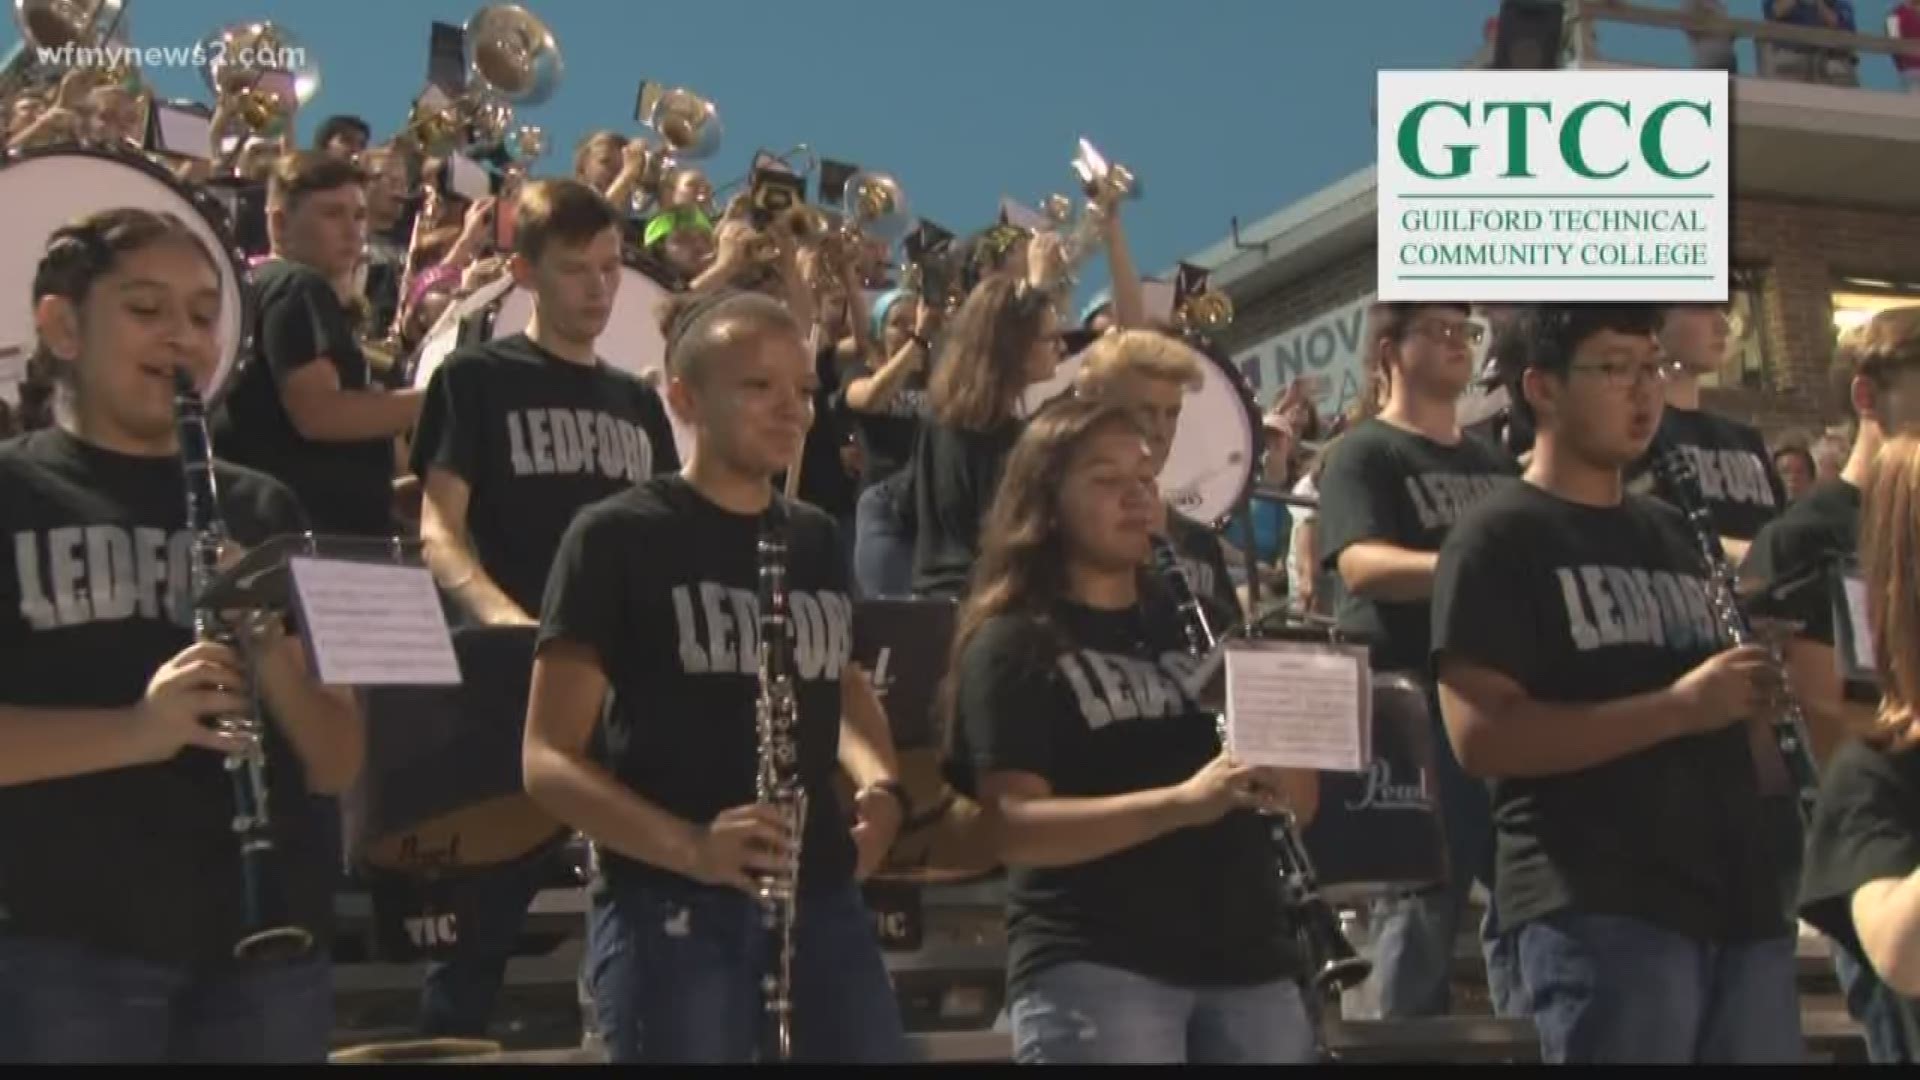 GTCC Band Of The Week